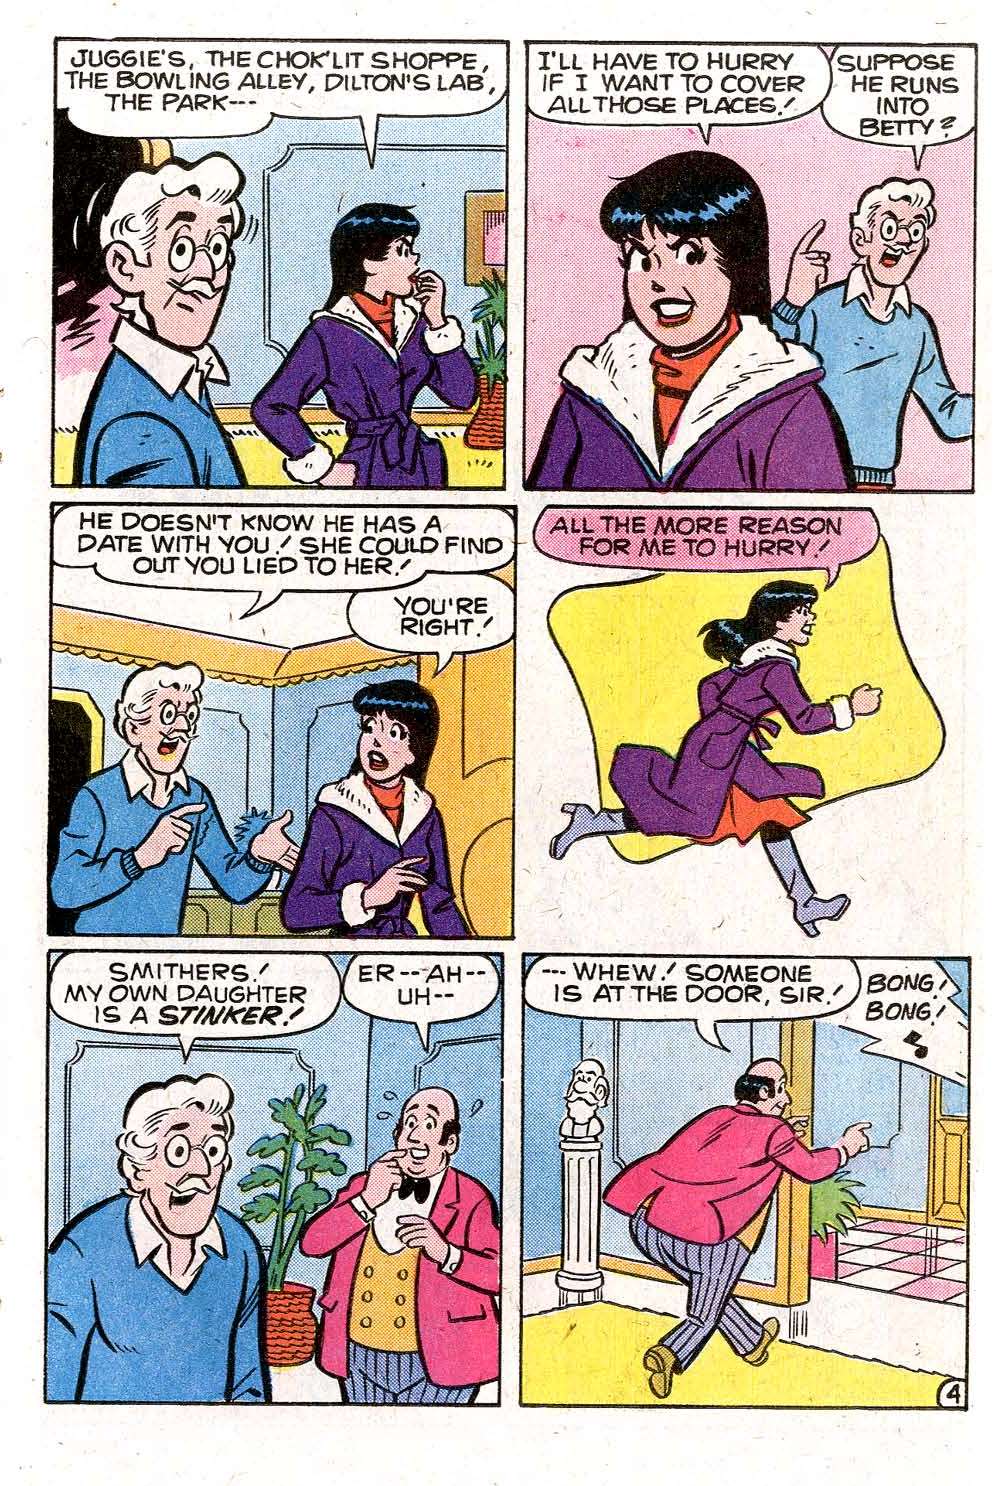 Read online Archie's Girls Betty and Veronica comic -  Issue #270 - 23